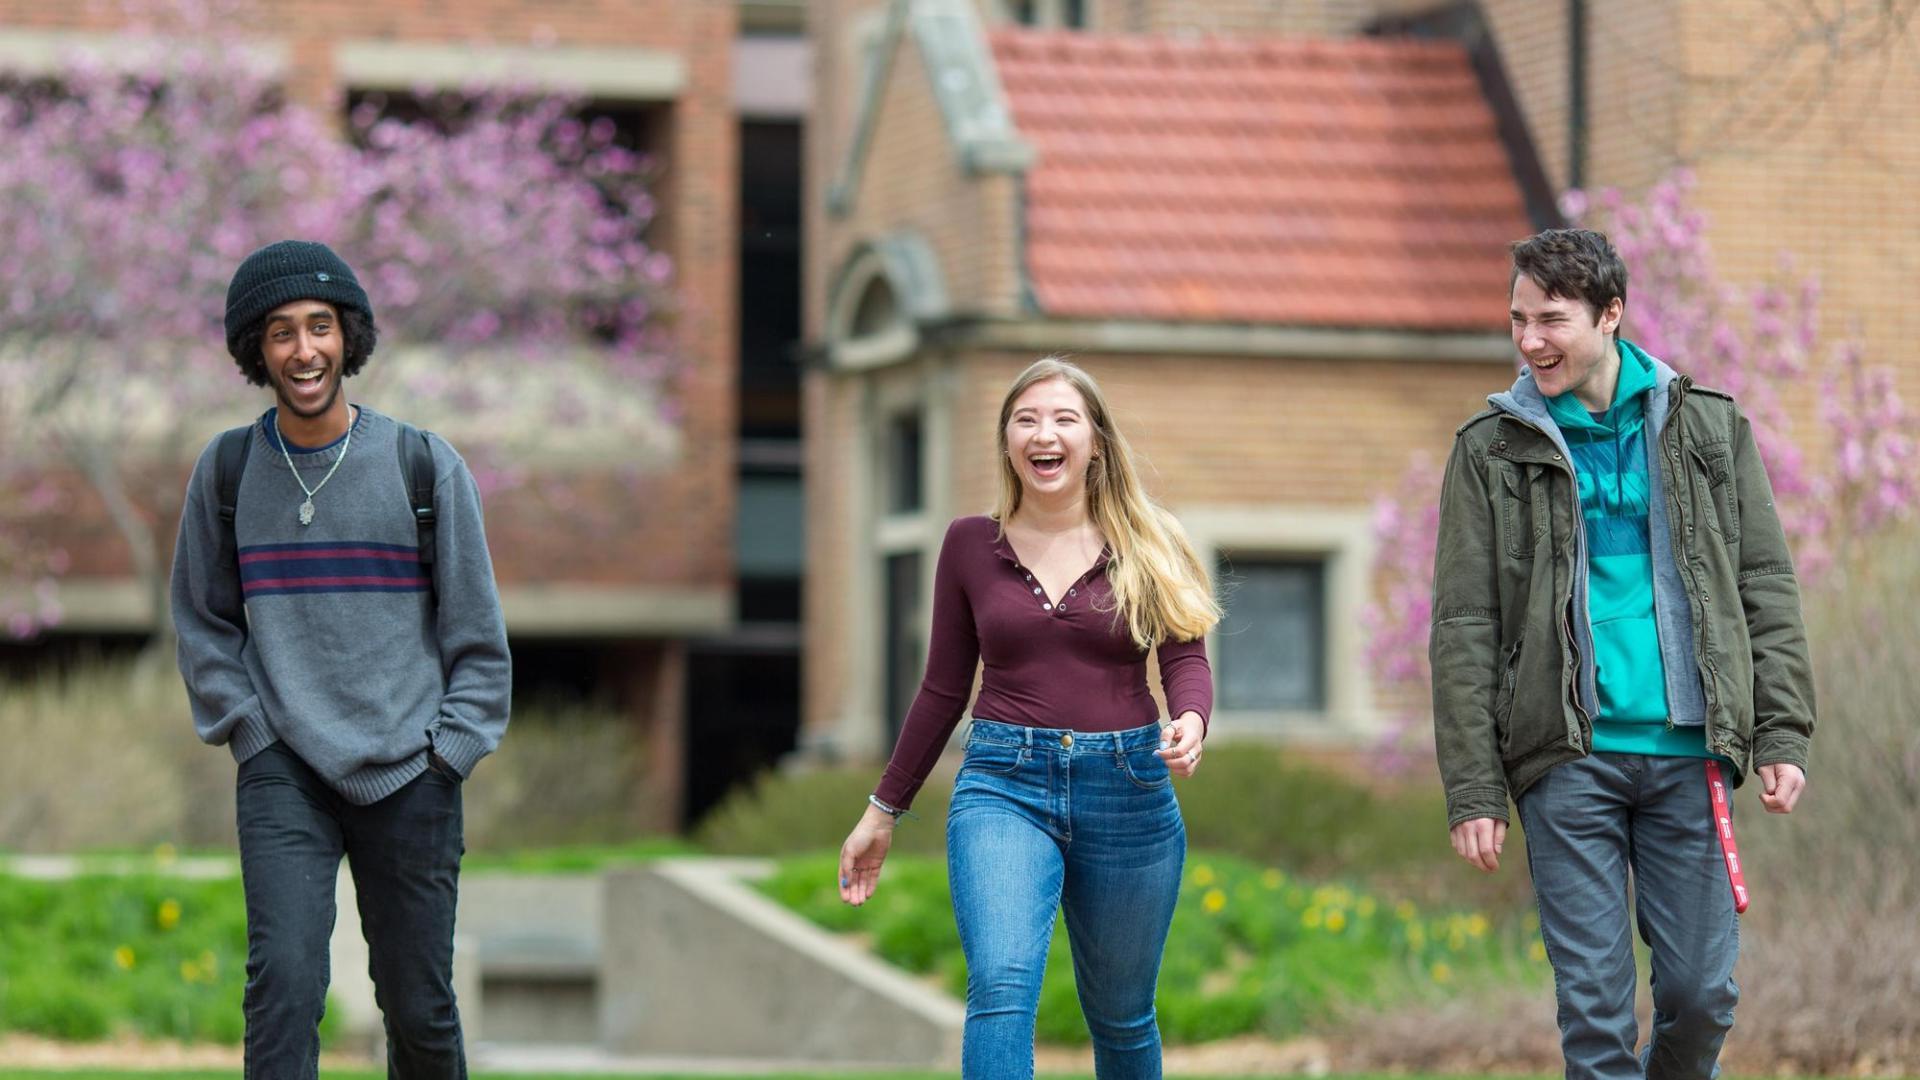 three students walking on Hamline University campus in spring, with flowering trees